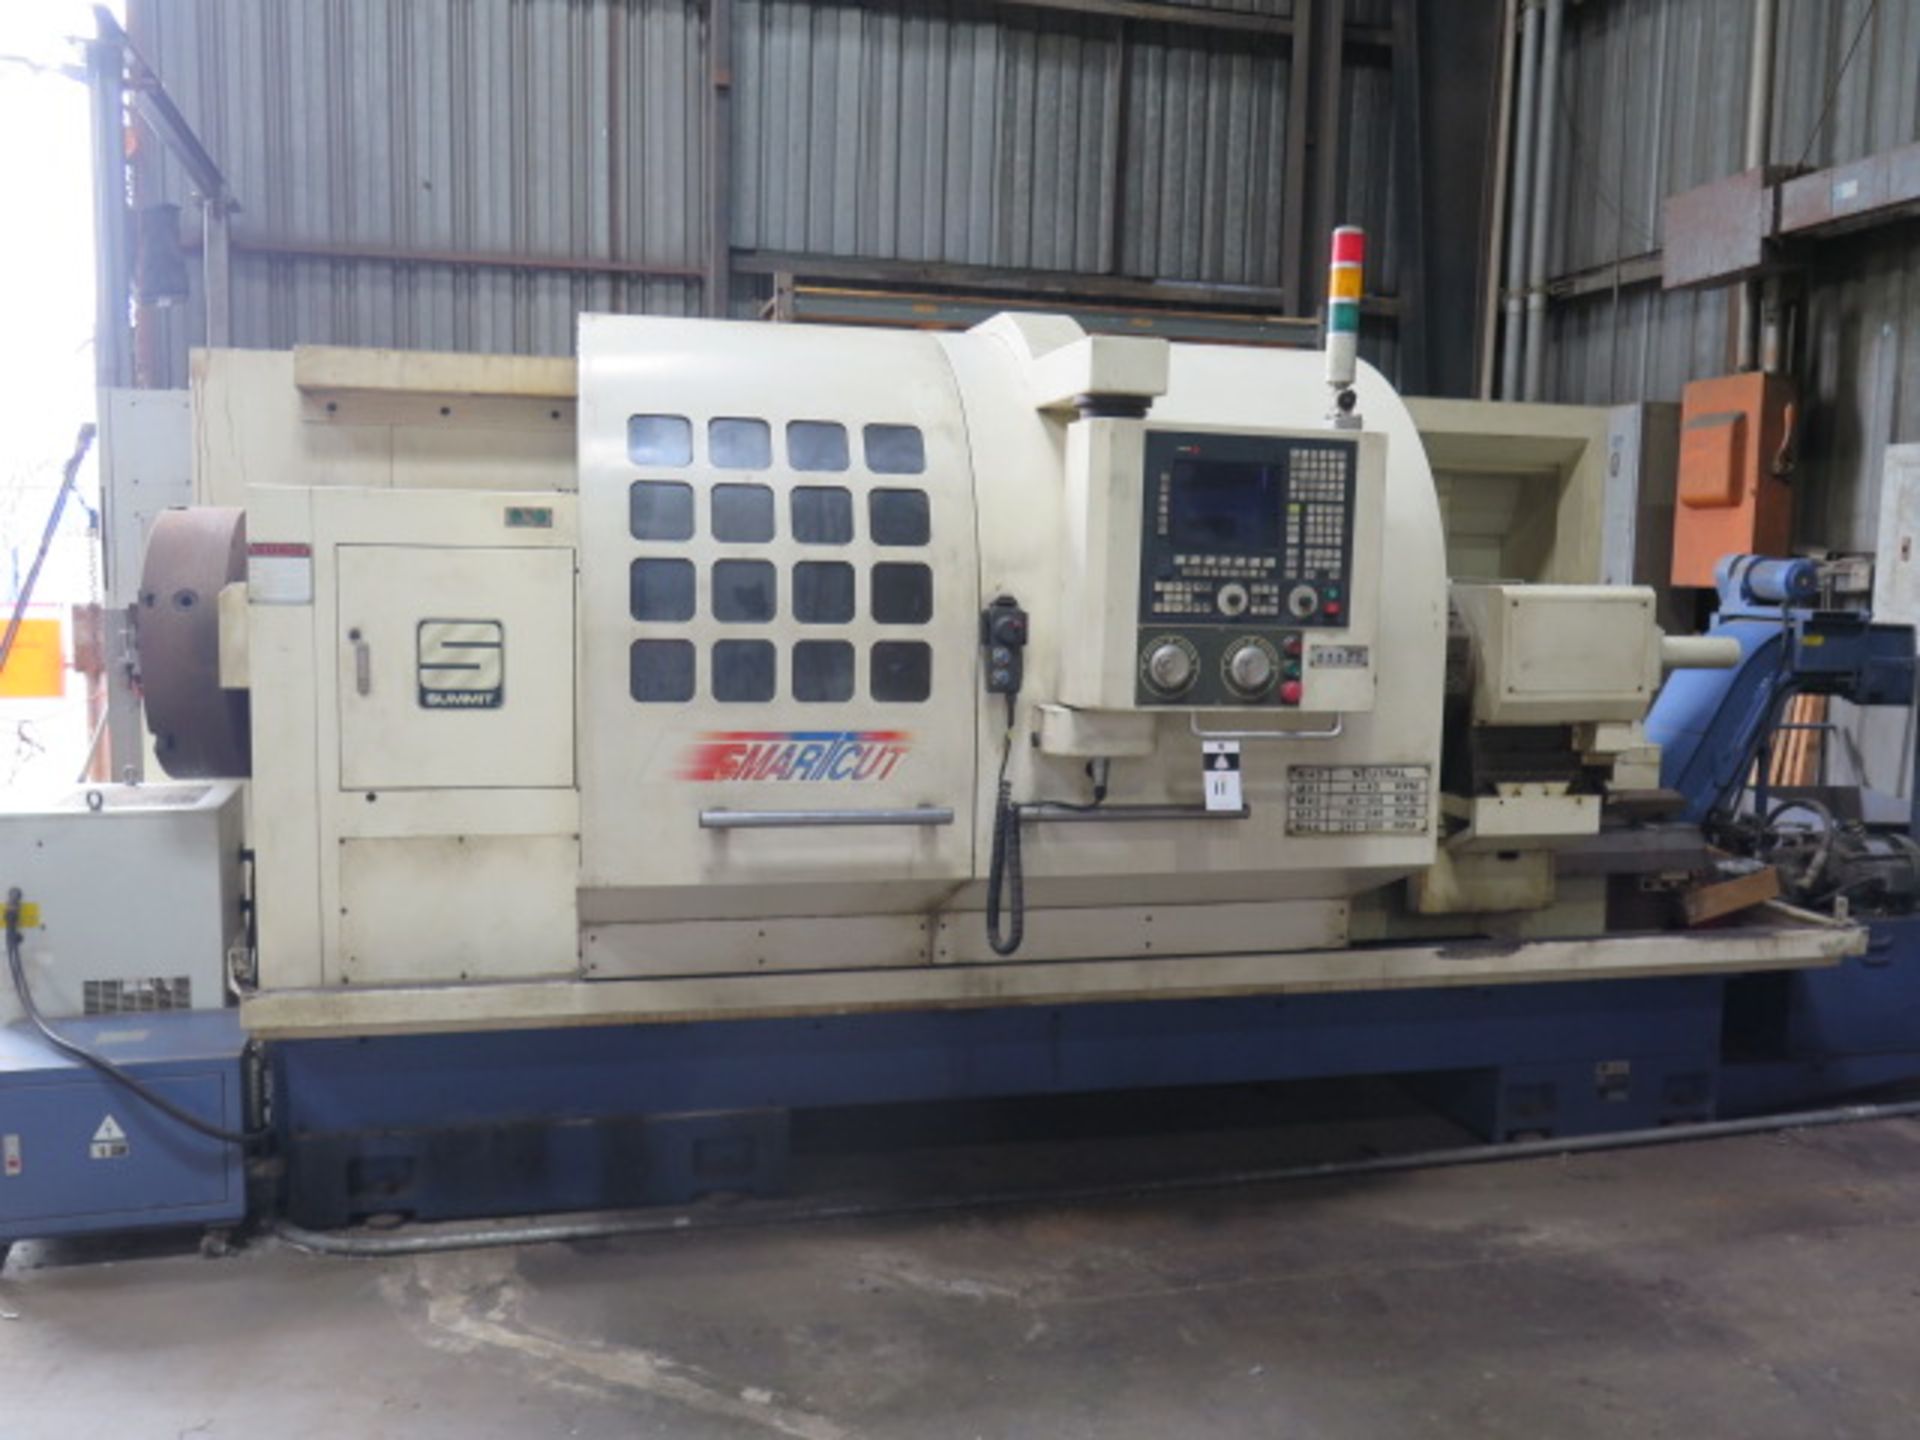 Summit “Smart Cut” SC30-9X80M Big Bore CNC Turning Center,Fagor Controls, 9” Spindle Bore,SOLD AS IS